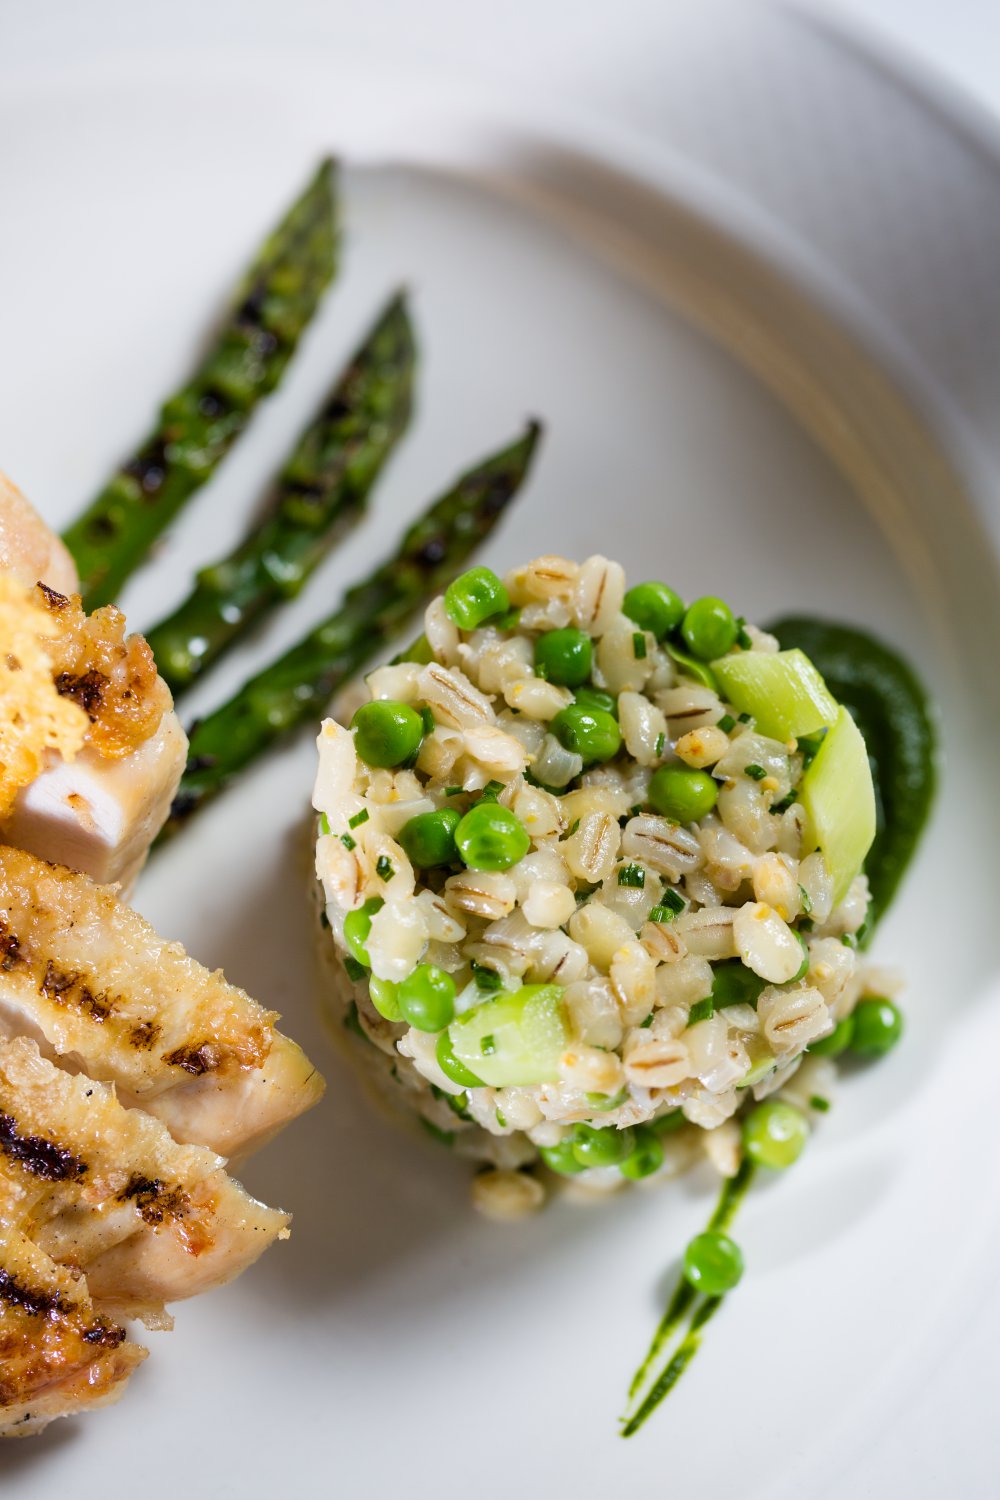 Chargrilled breast of Chicken, pearl barley 